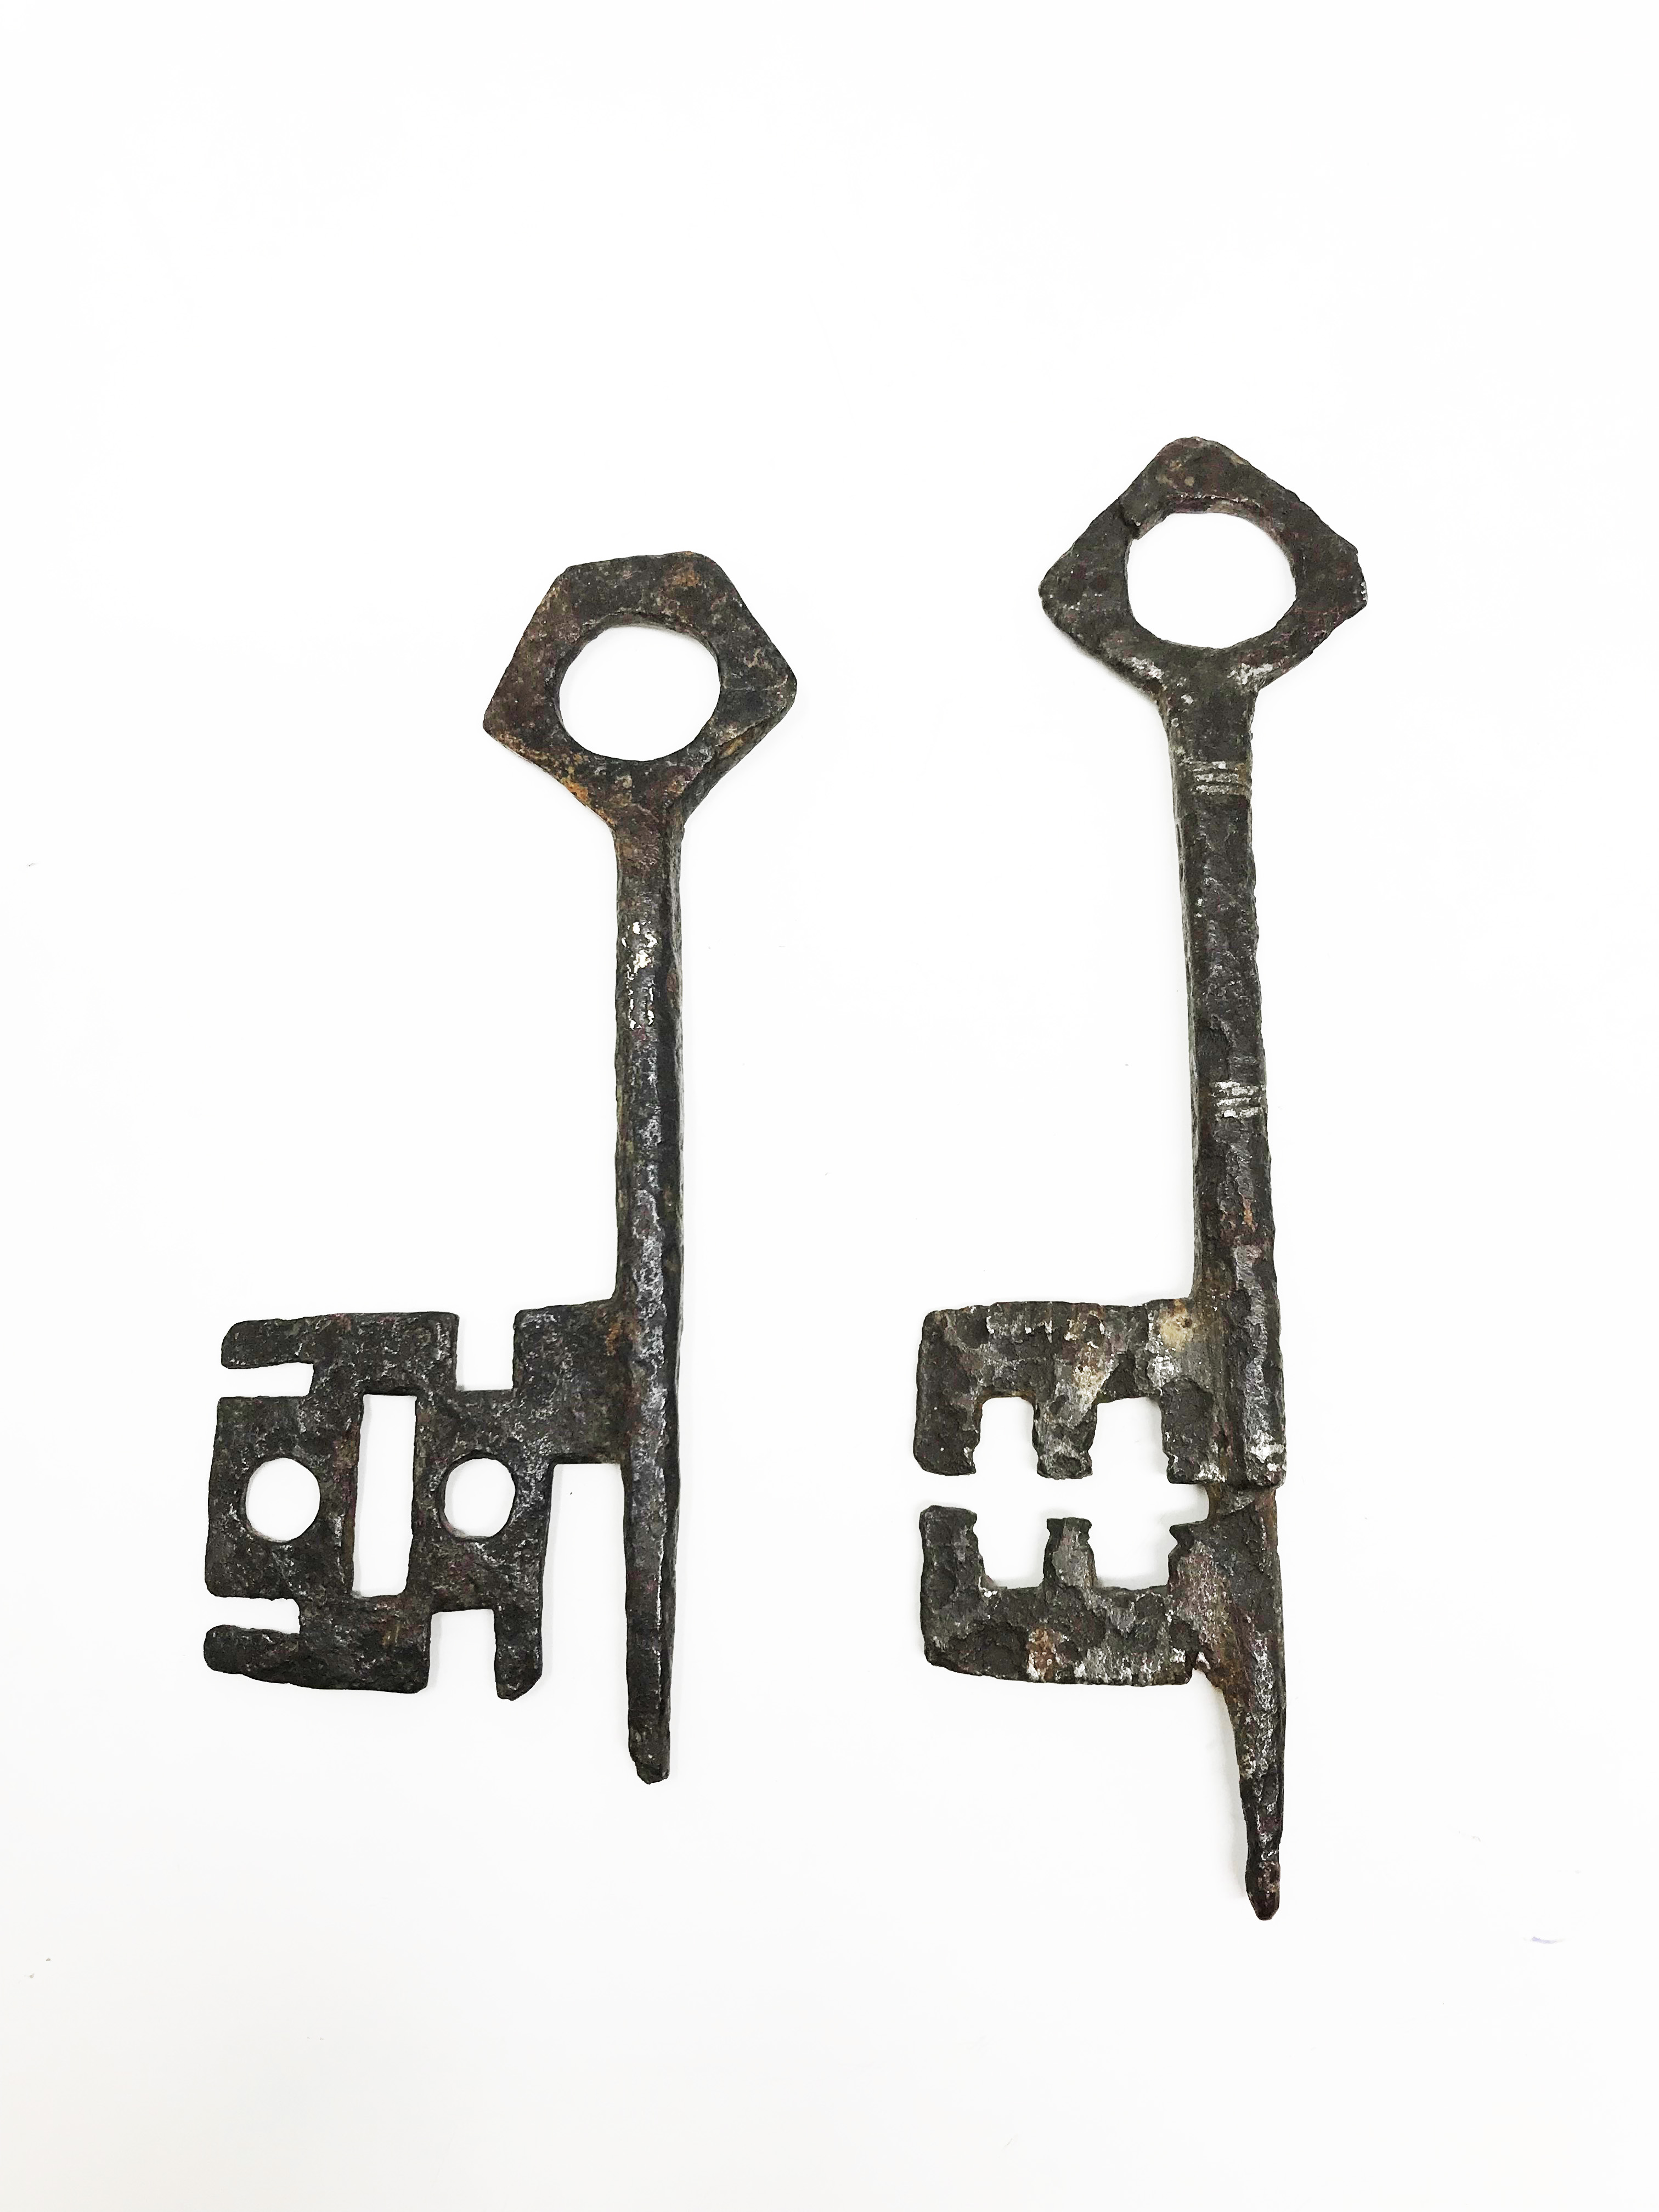 Two gothic keys14, 1 - 17 cm.Part of the chapter "From the Time of the Cathedrals".